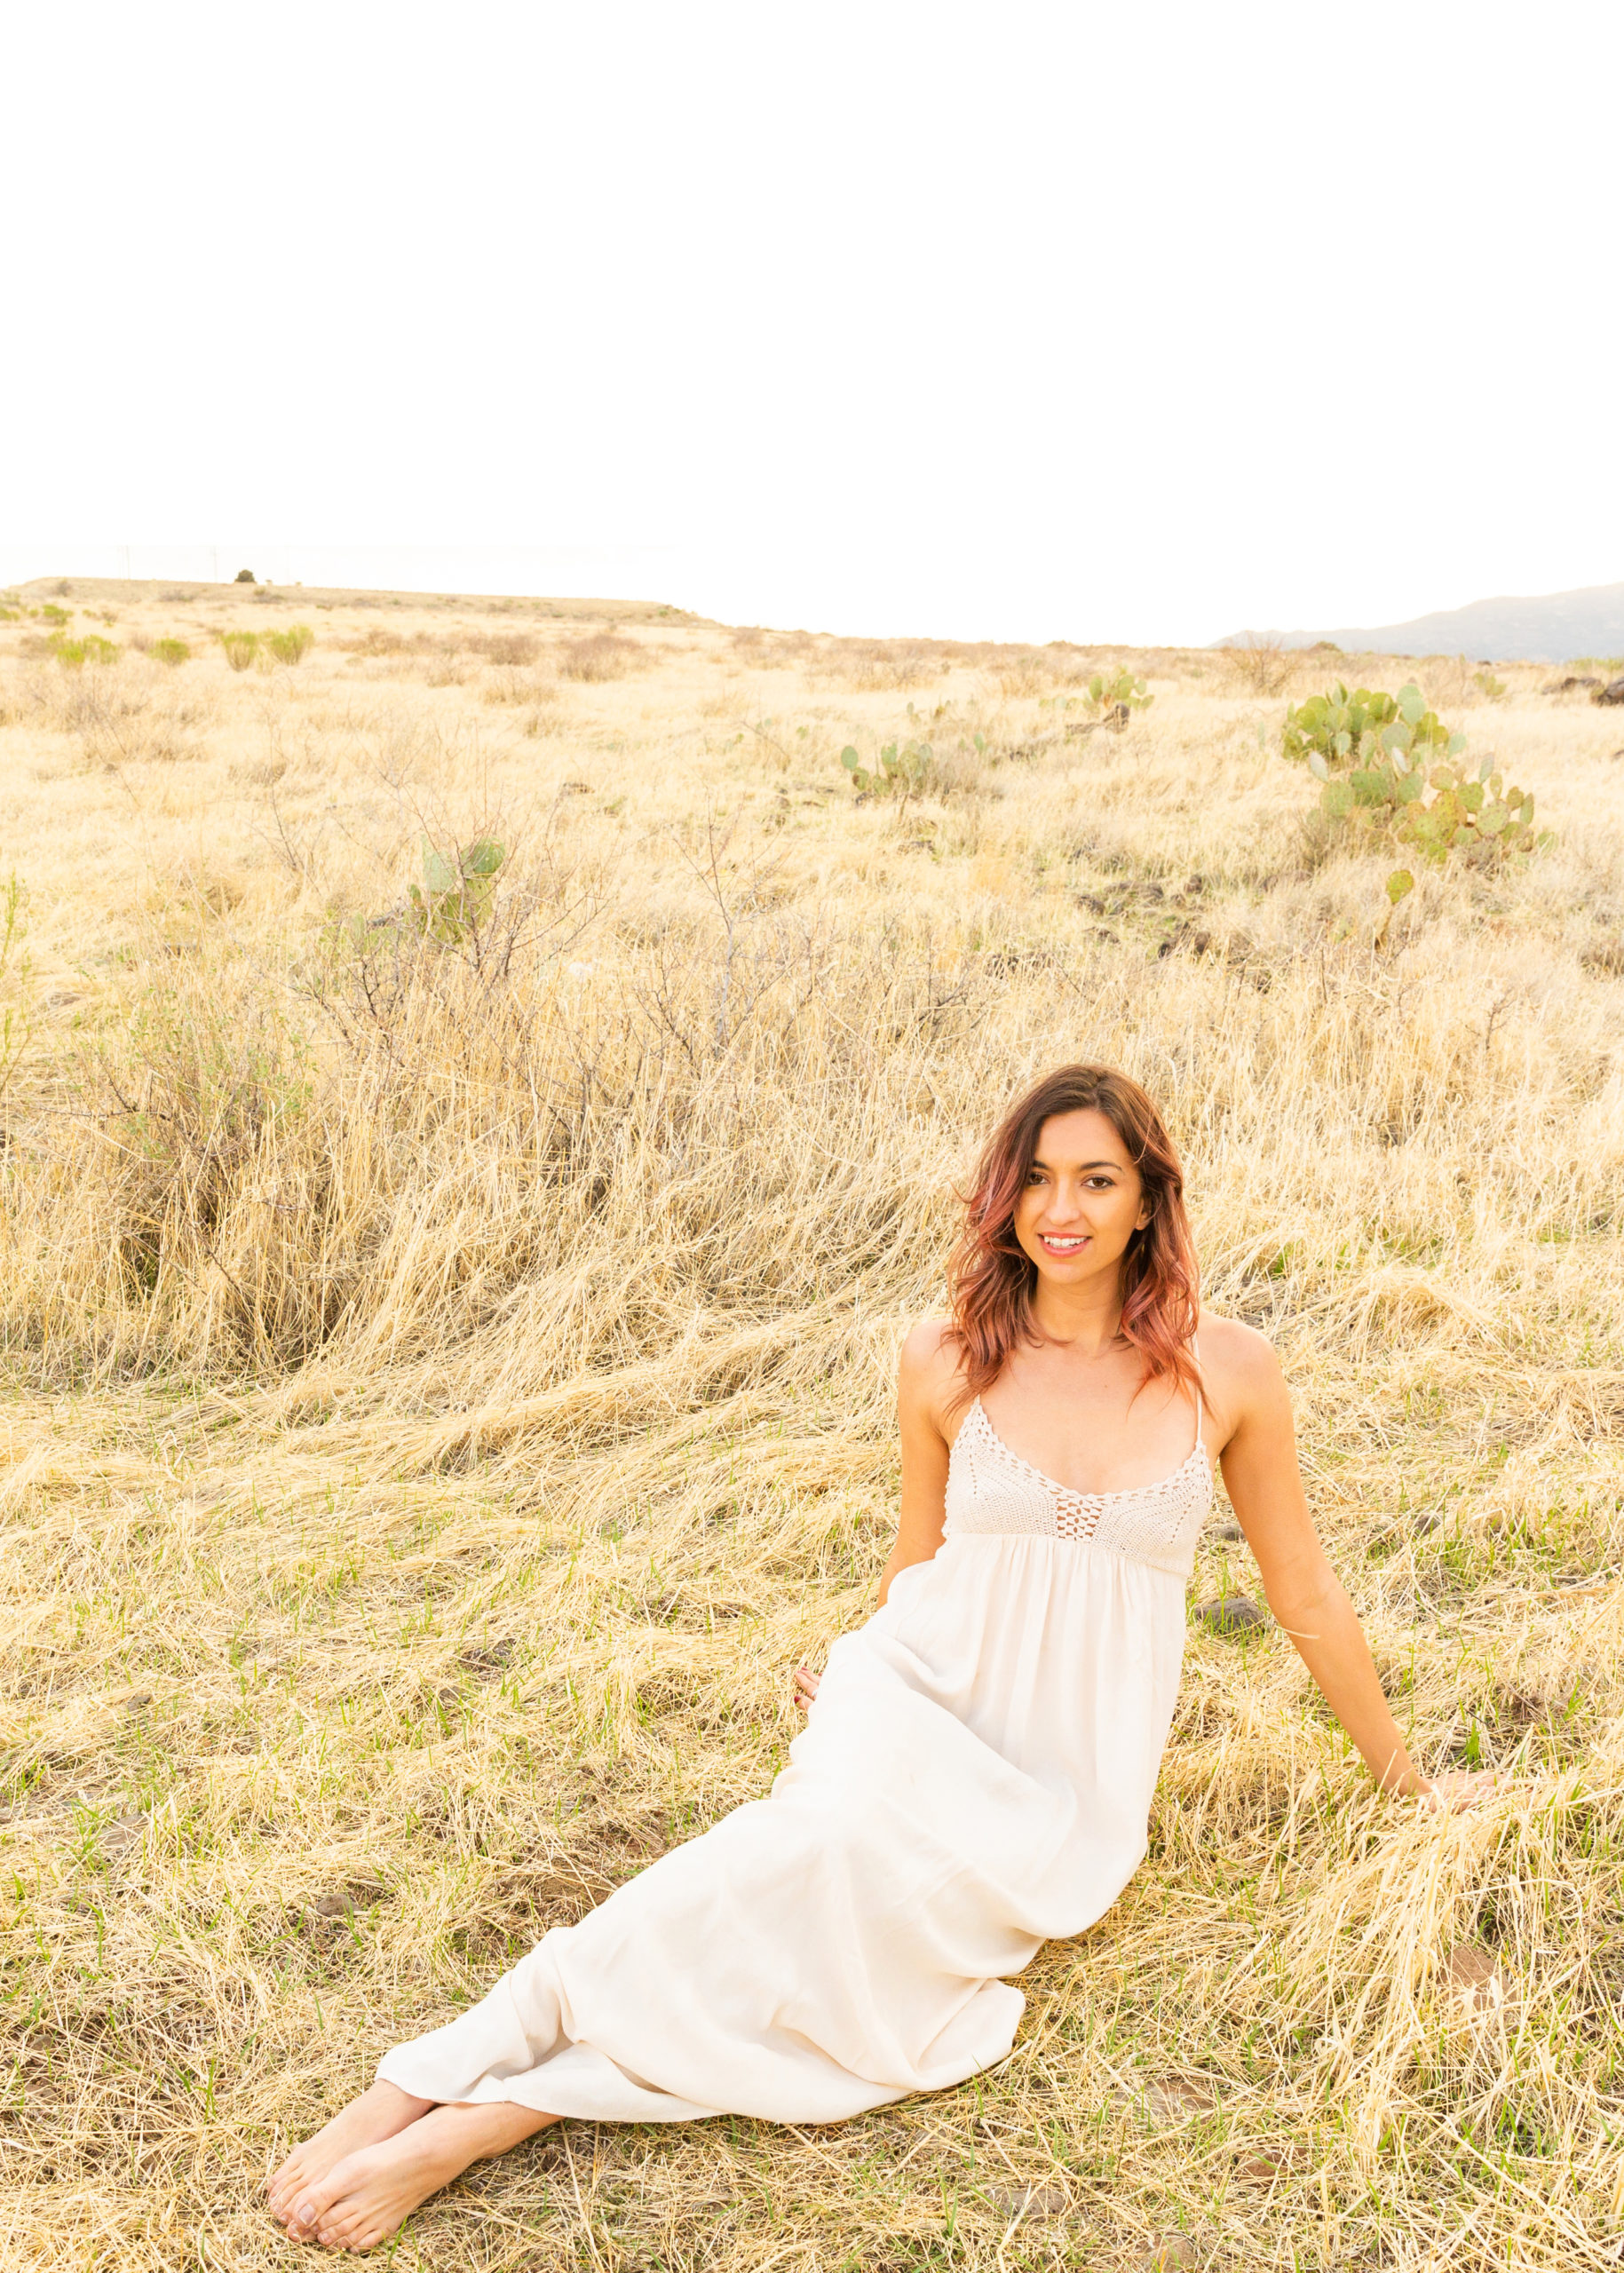 Golden hour glow during a dreamy desert sunset portrait session with model Amanda.